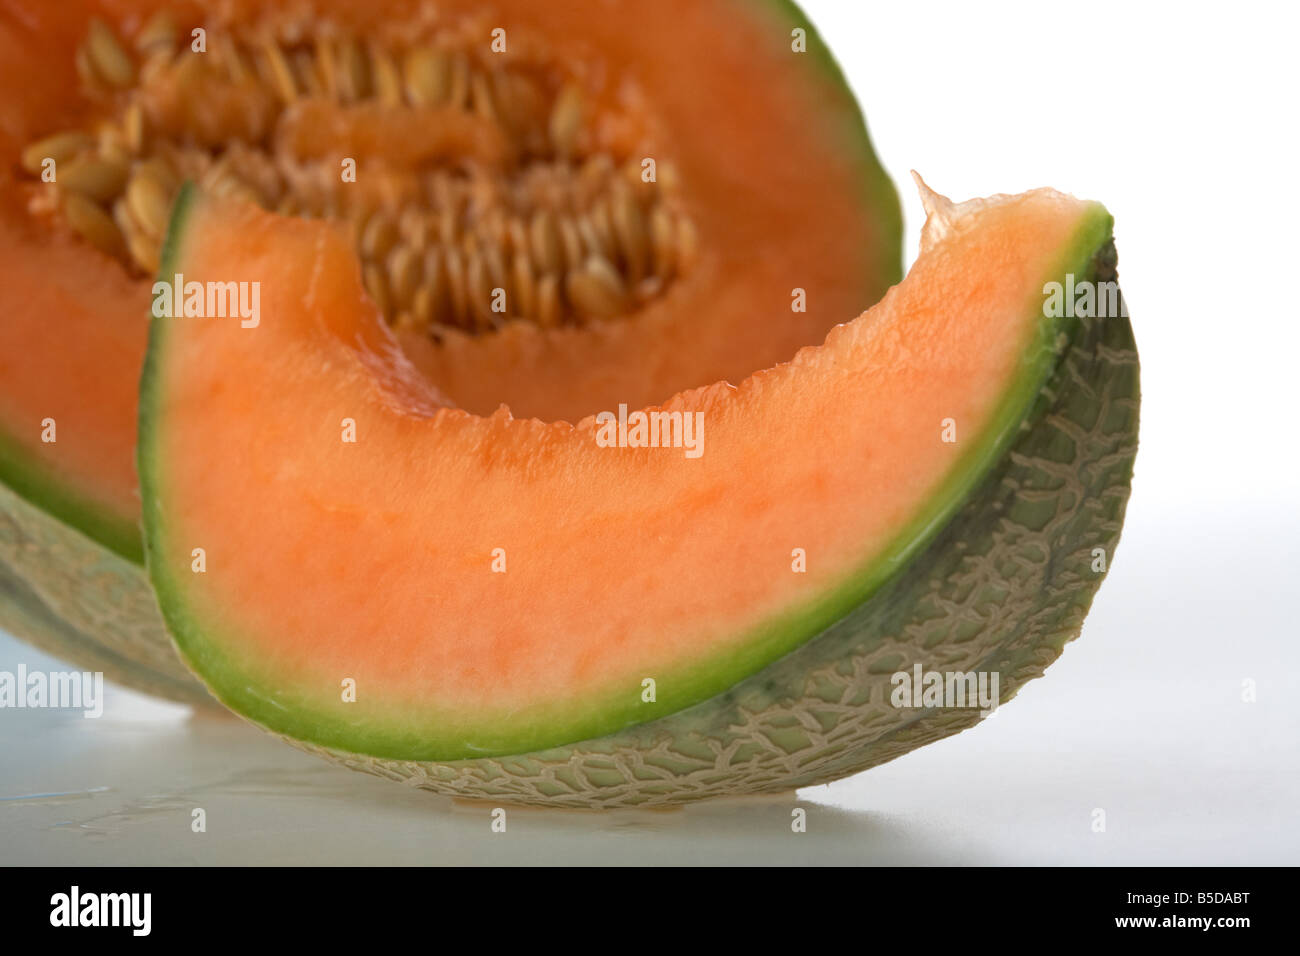 cut half of ripe european cantaloupe melon showing seeds with individual slice with seeds removed Stock Photo